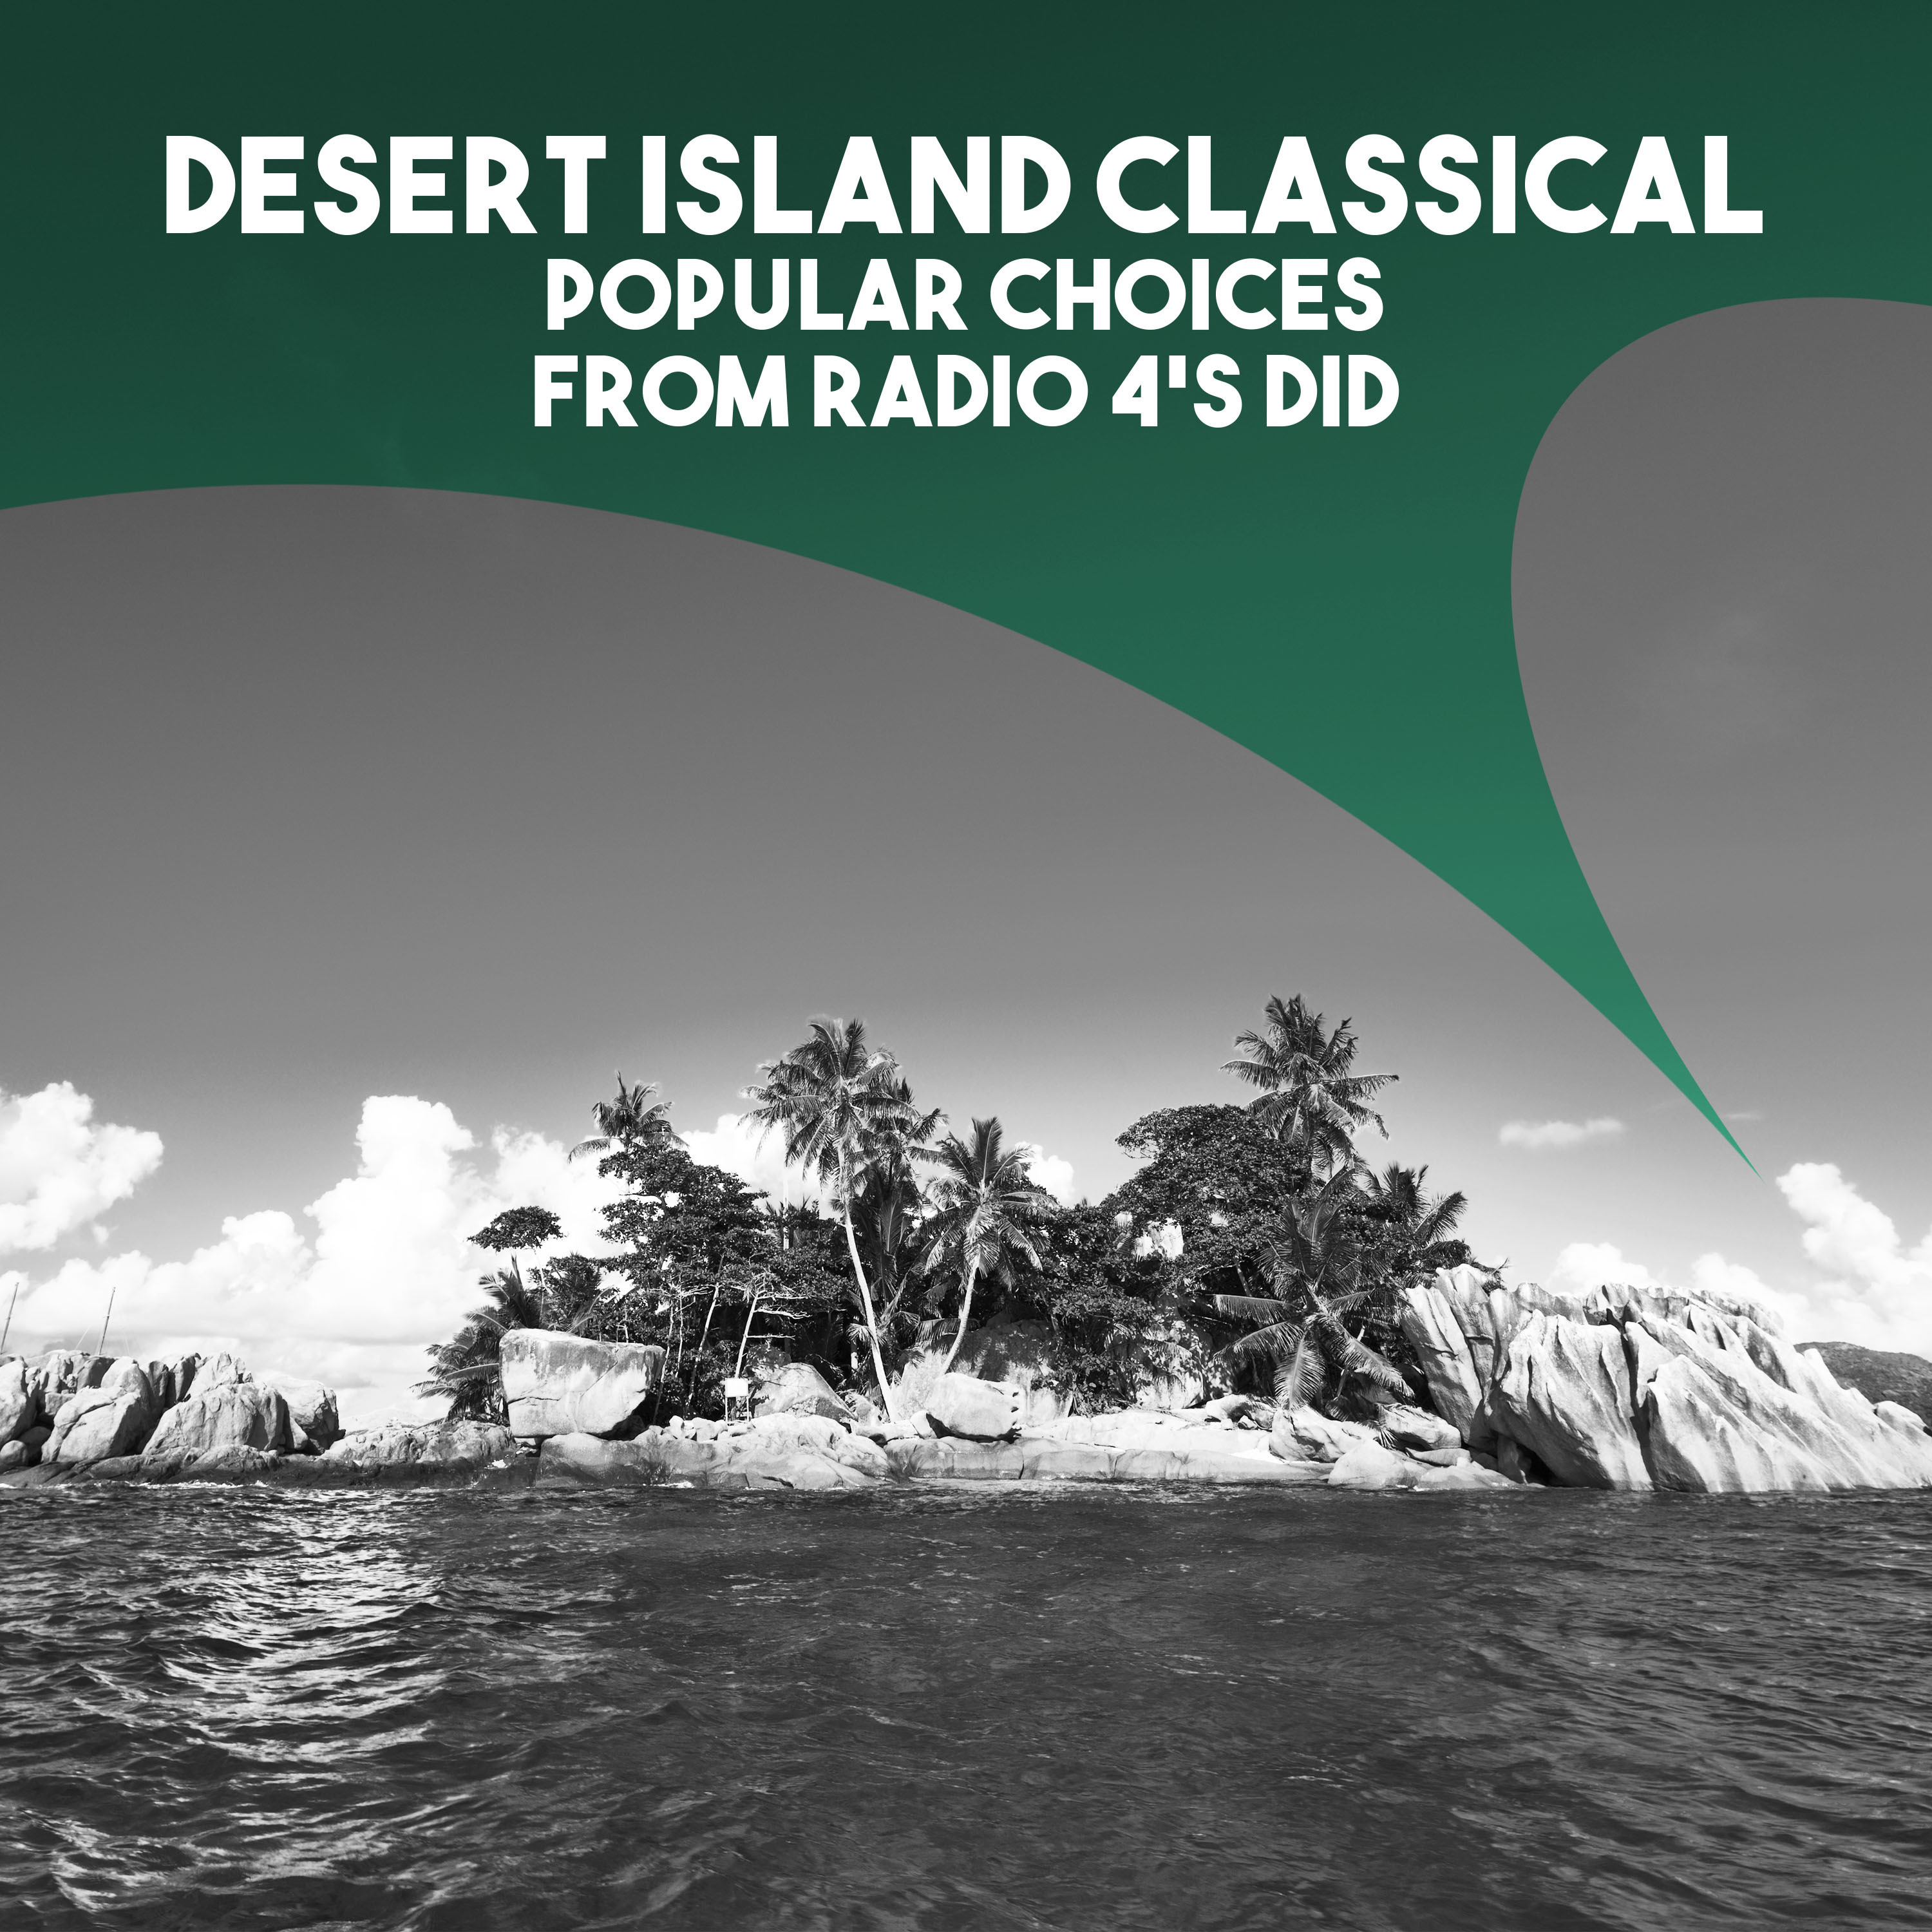 Desert Island Classical: Popular Choices from Radio 4's DID